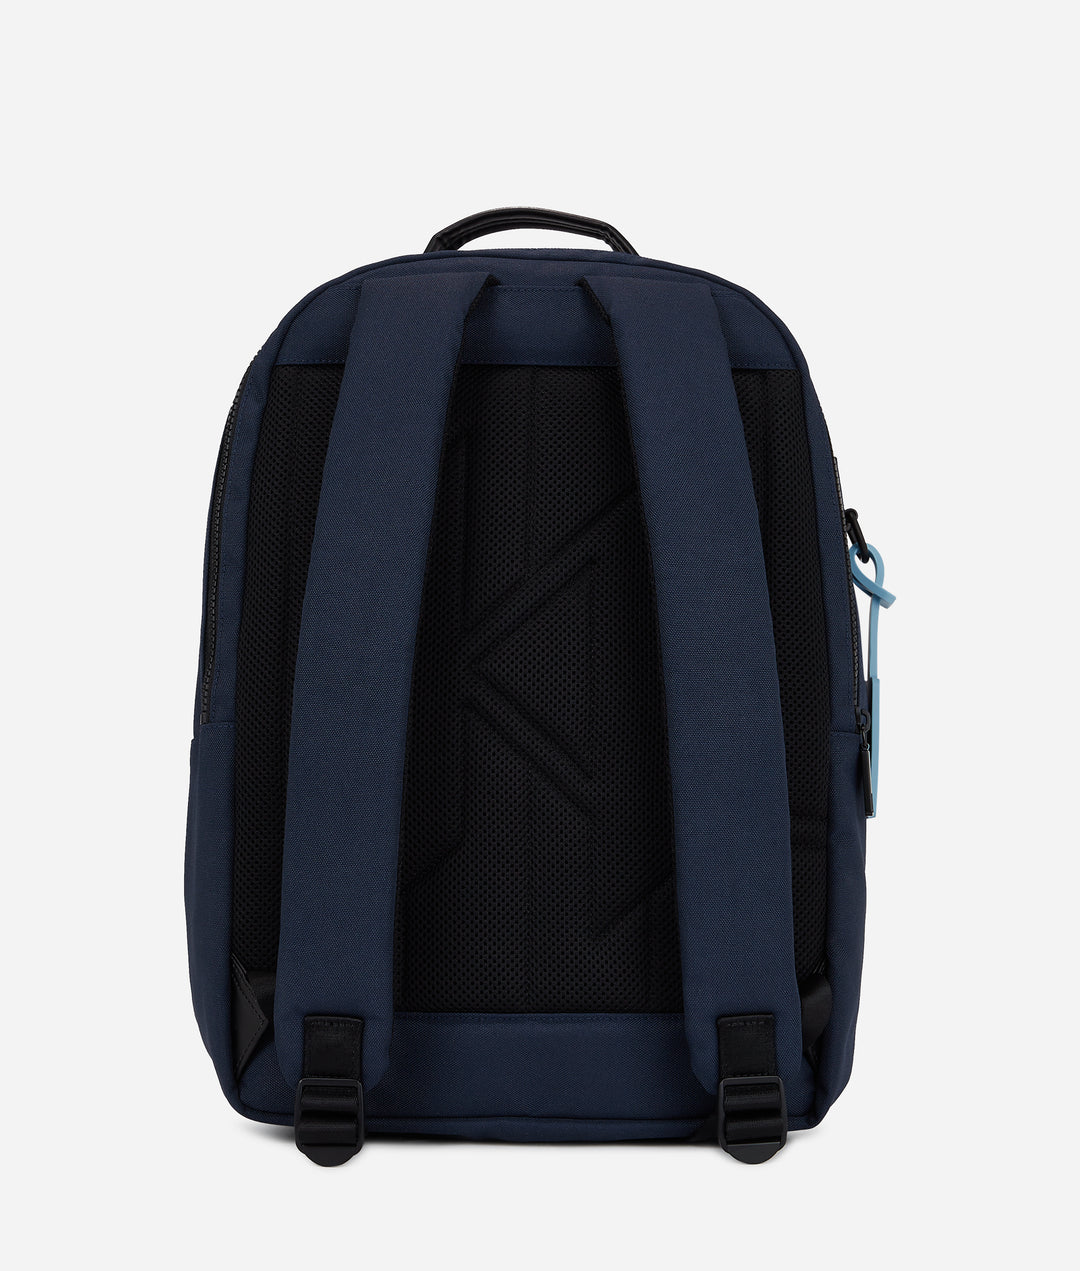 K/PASS BACKPACK